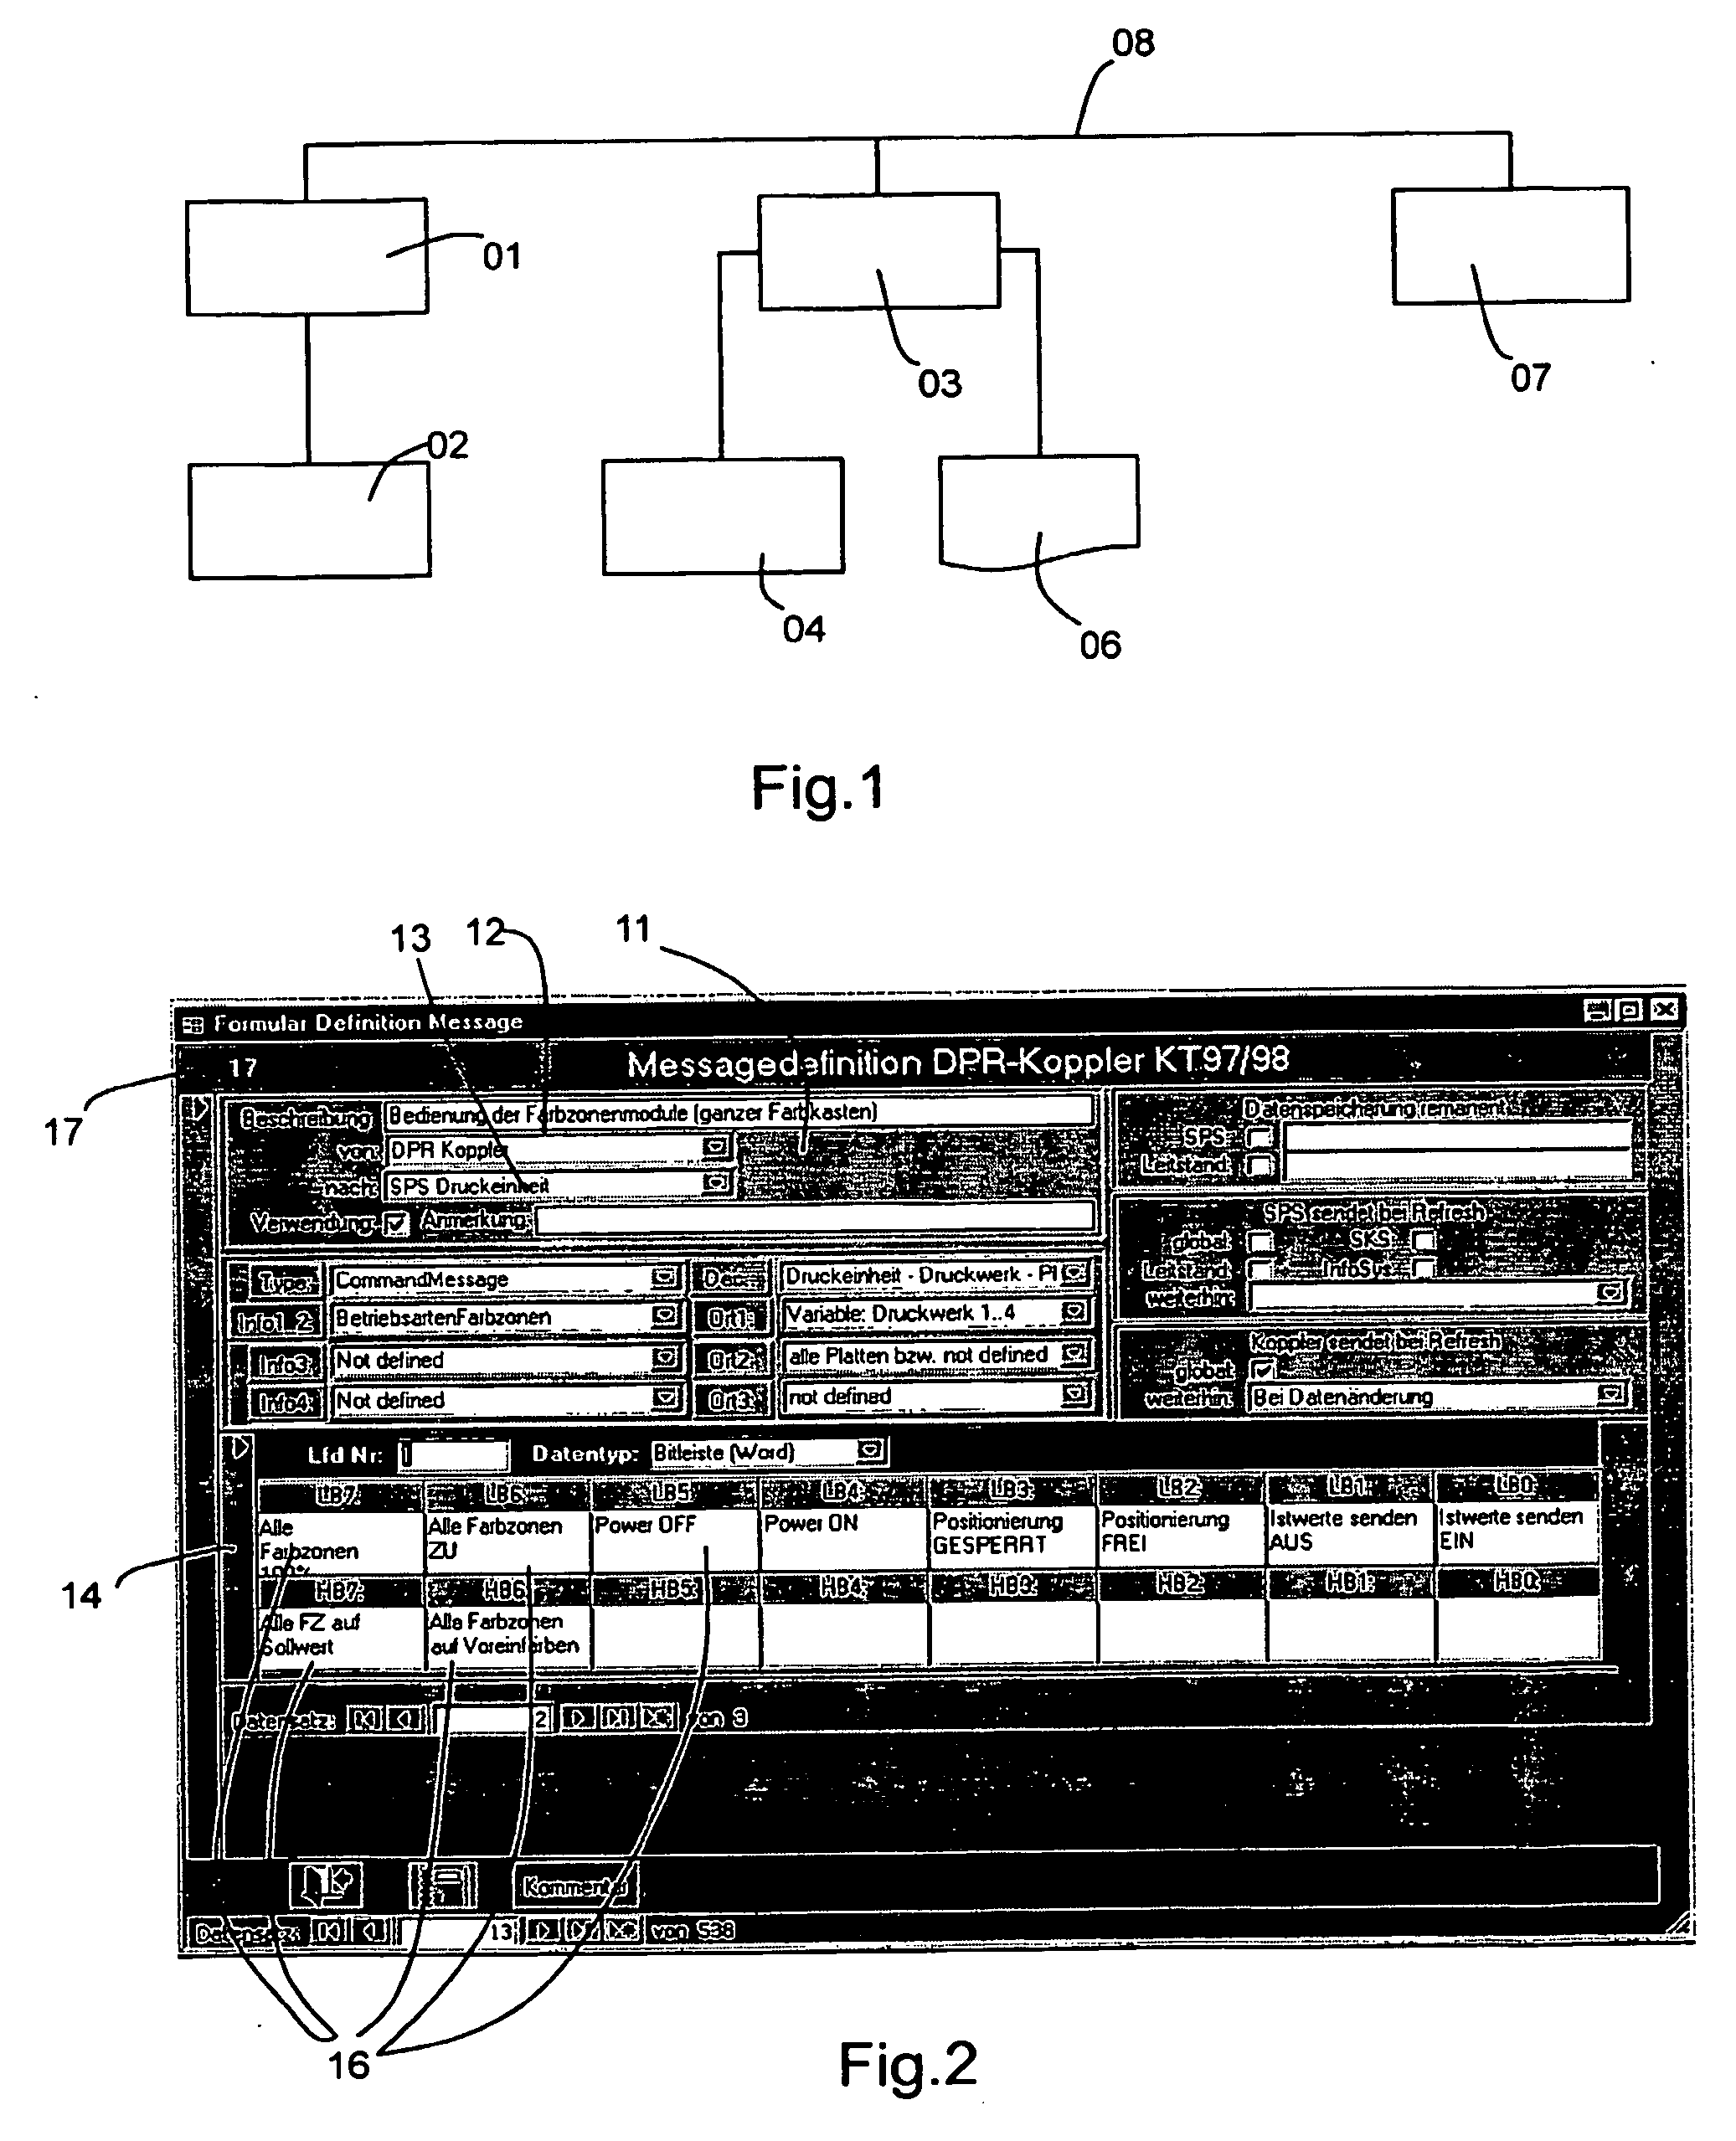 Method and Device for Carrying Out the Functional Check and Functional Checking of a Technical Unit